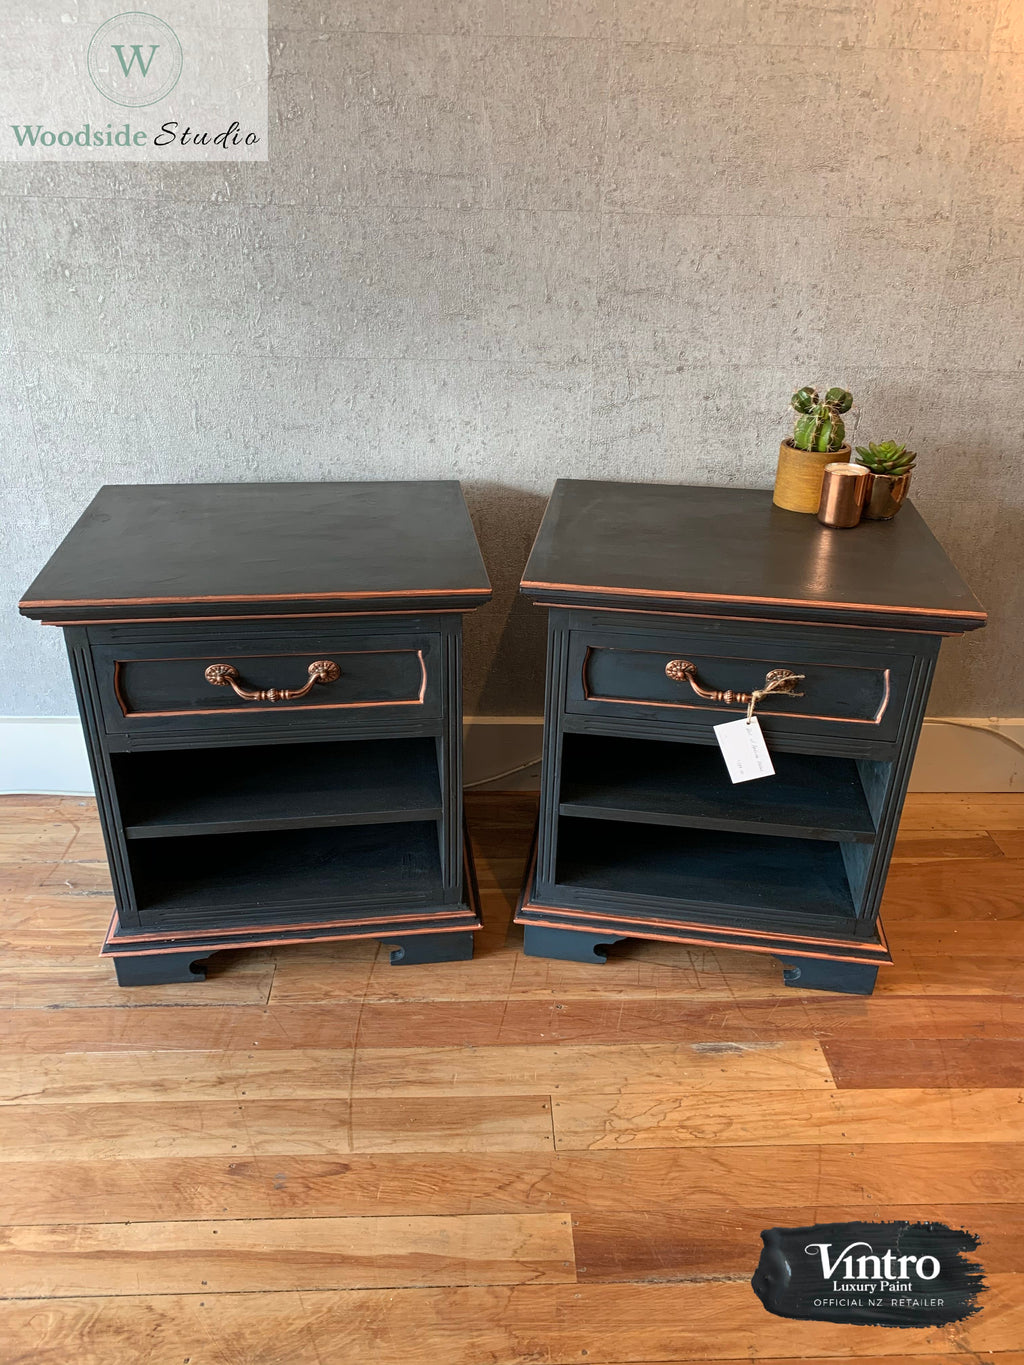 Bedside Tables - Nightfall and Copper